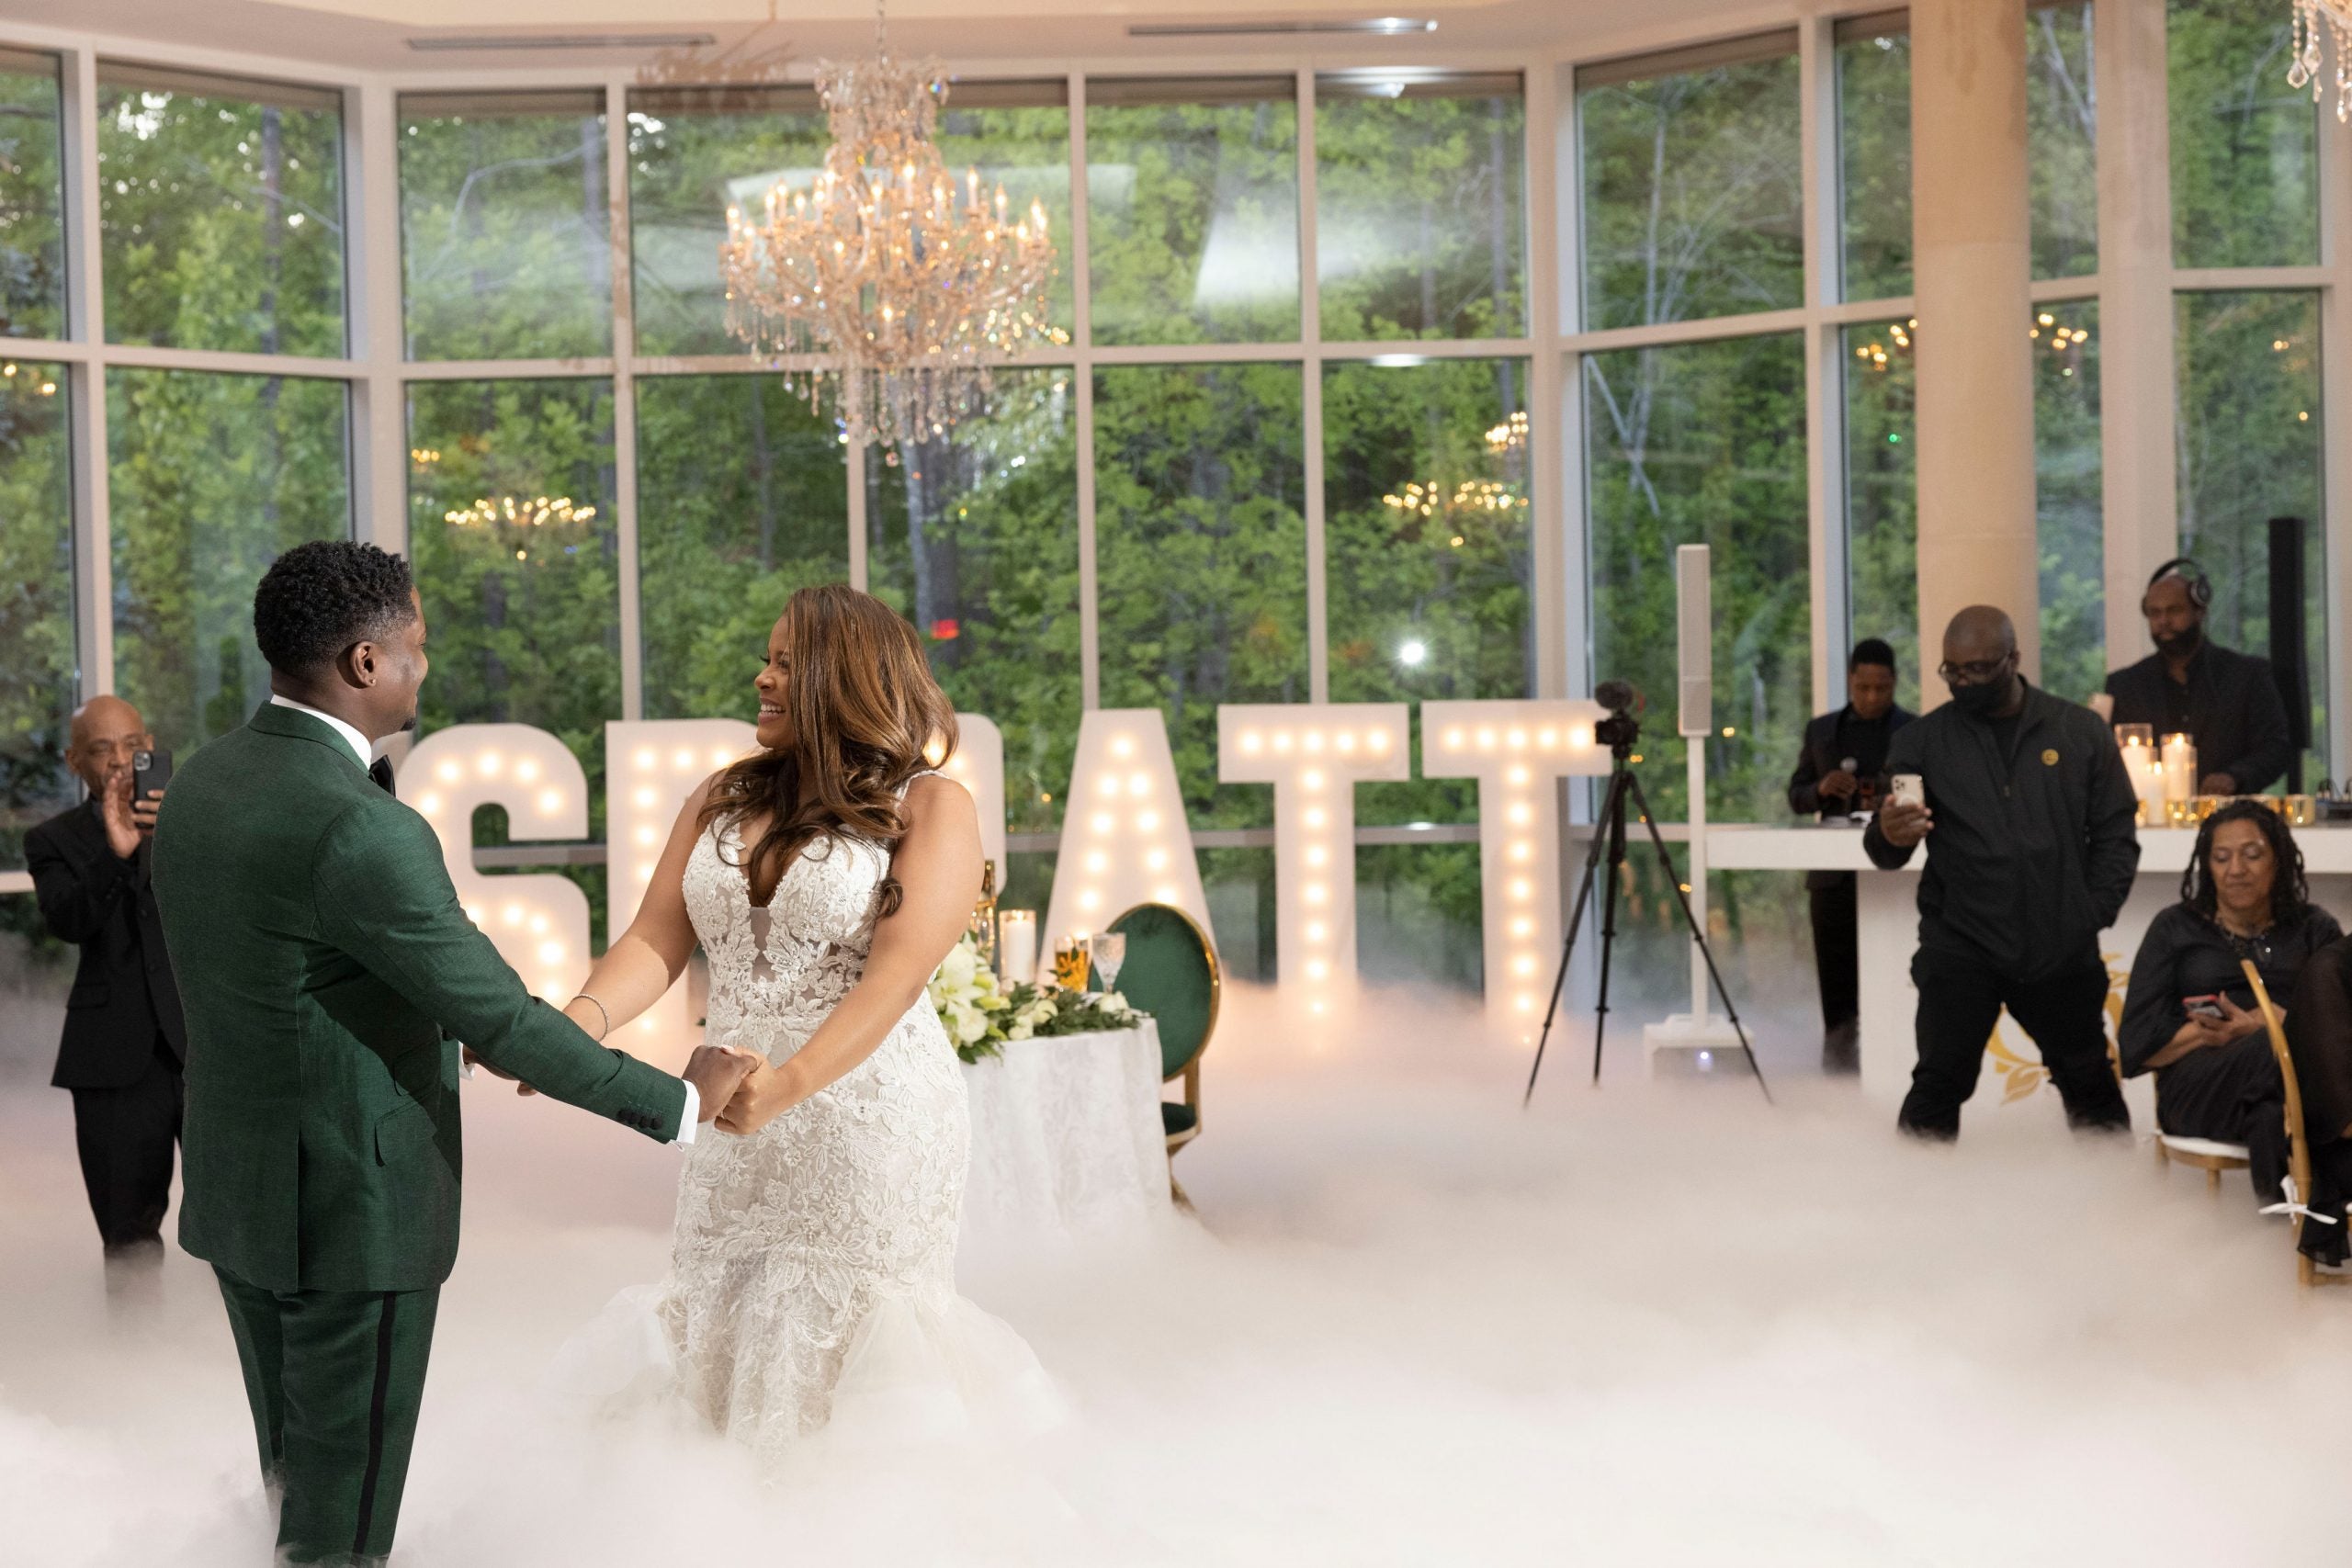 Bridal Bliss: Dalen And Stacey's Intimate Atlanta Wedding Was Full Of Some Tears And Plenty Of Joy